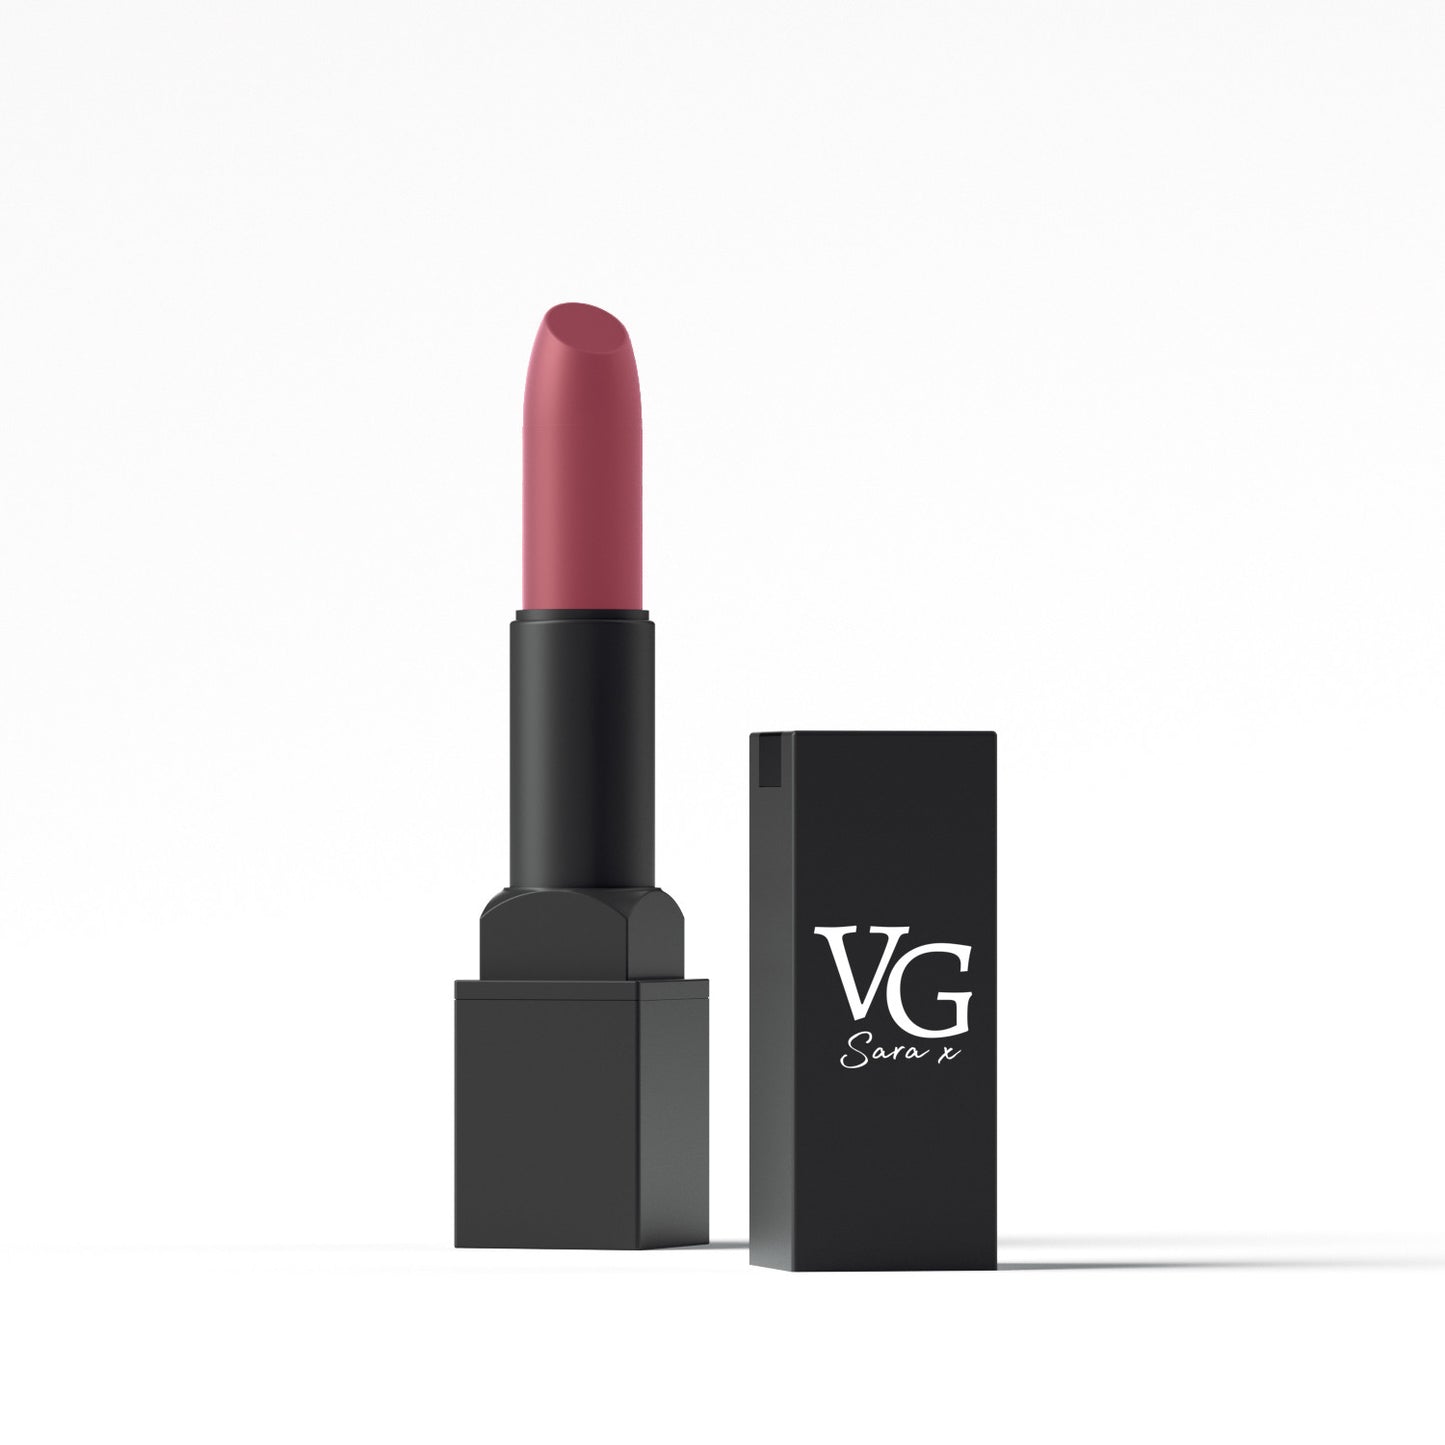 Close-up of VG Cosmetics lipstick with logo